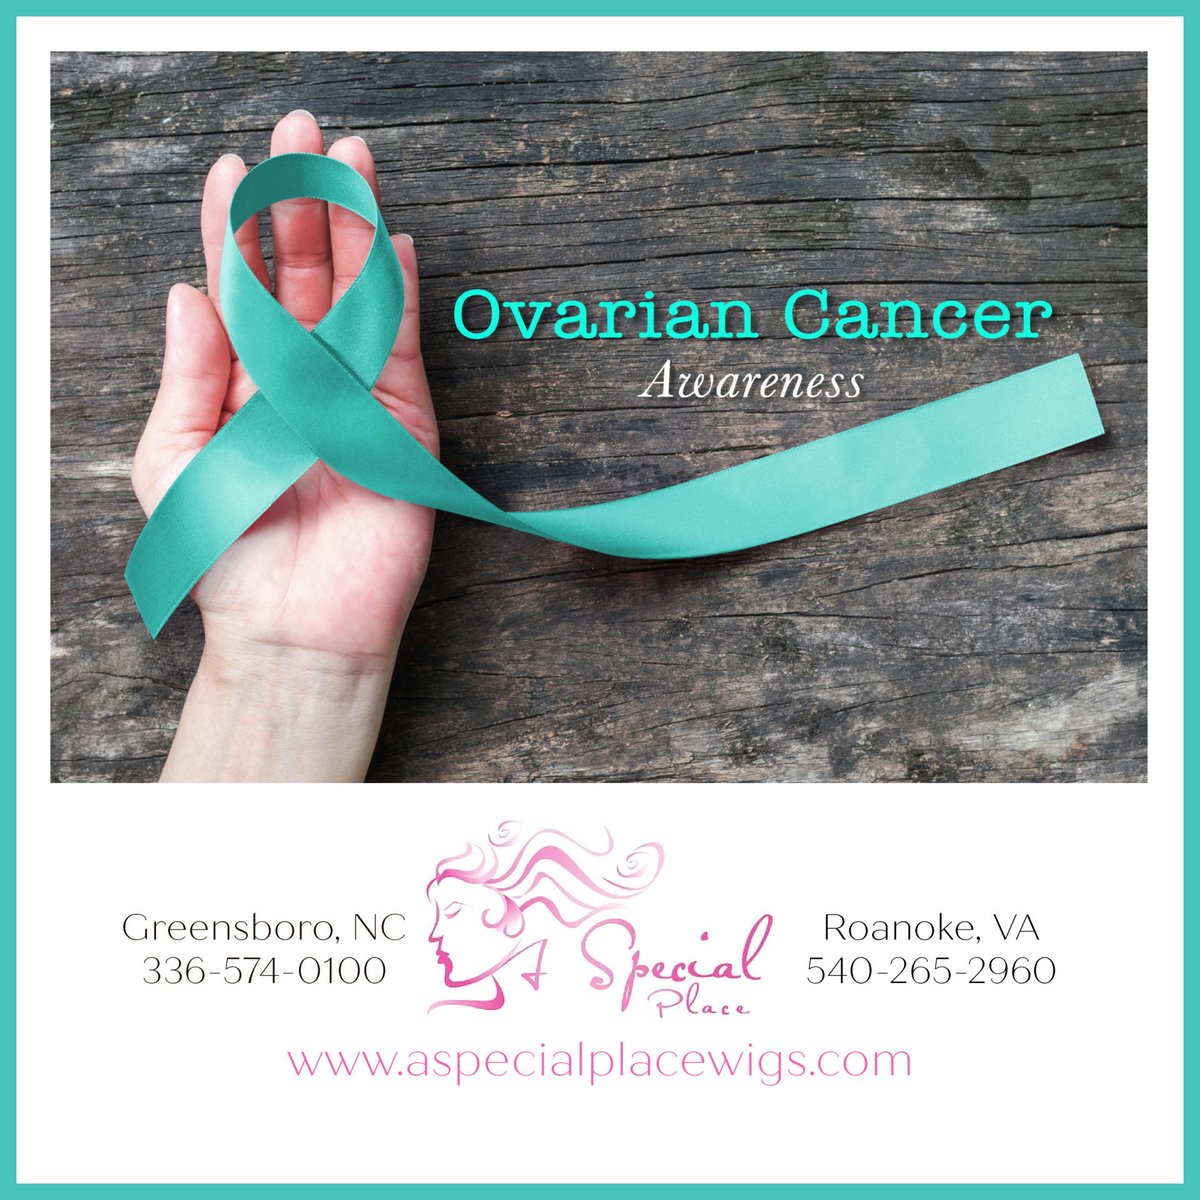 May 8 is WORLD OVARIAN CANCER AWARENESS DAY! Join us at A Special Place promoting awareness, early detection and the search for a cure! #wigboutique #ovariancancer #wigsforcancer #gynecologicalcancer #chemowigs